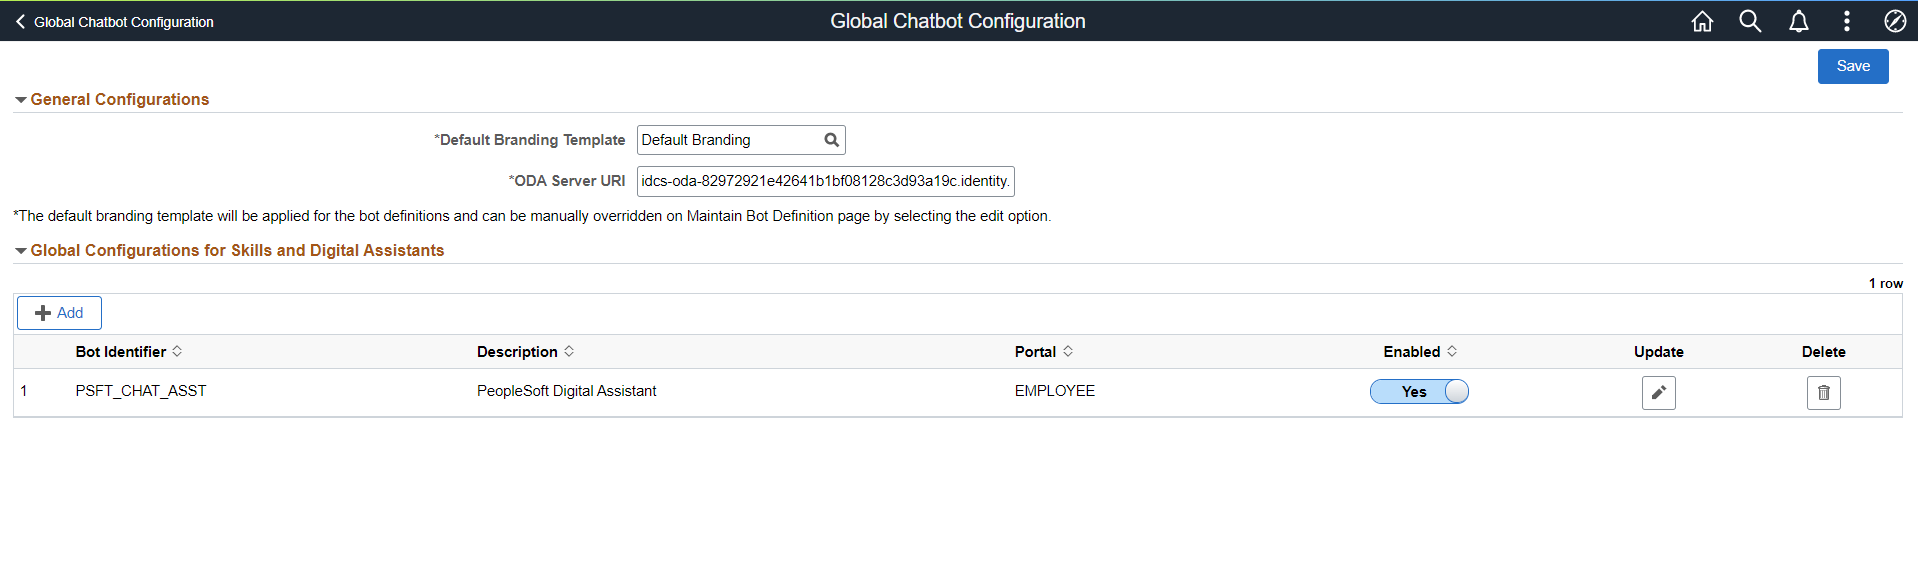 Global Chatbot Configuration for PICASO